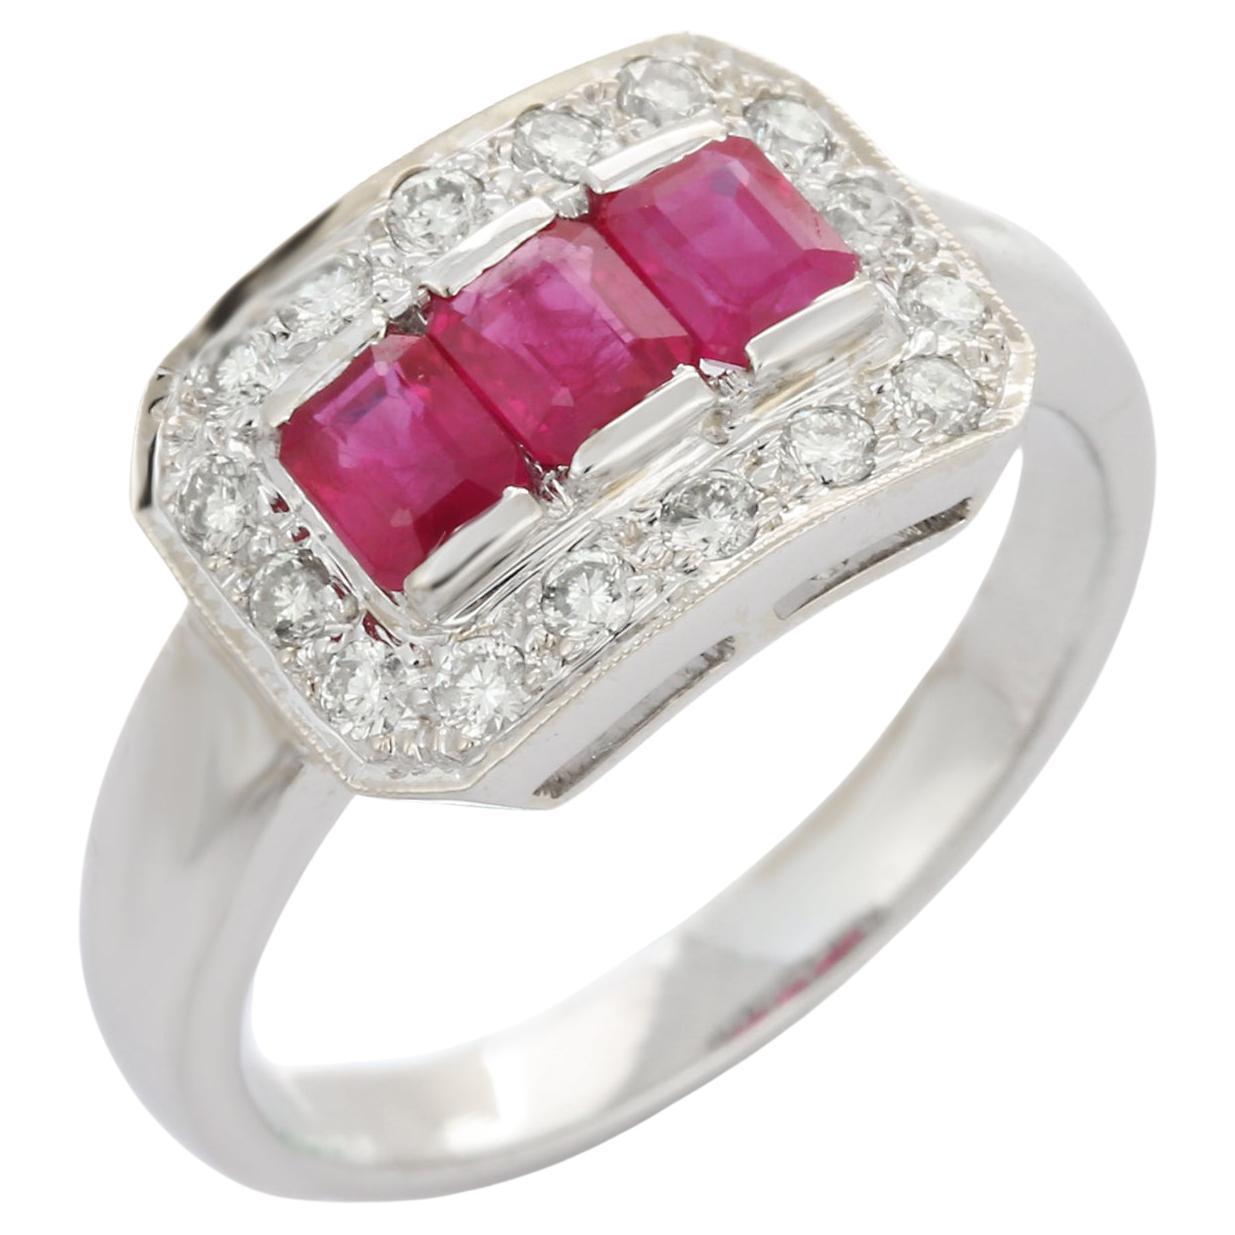 For Sale:  Three Stone Ruby and Clustered Diamond Engagement Ring in 18K White Gold